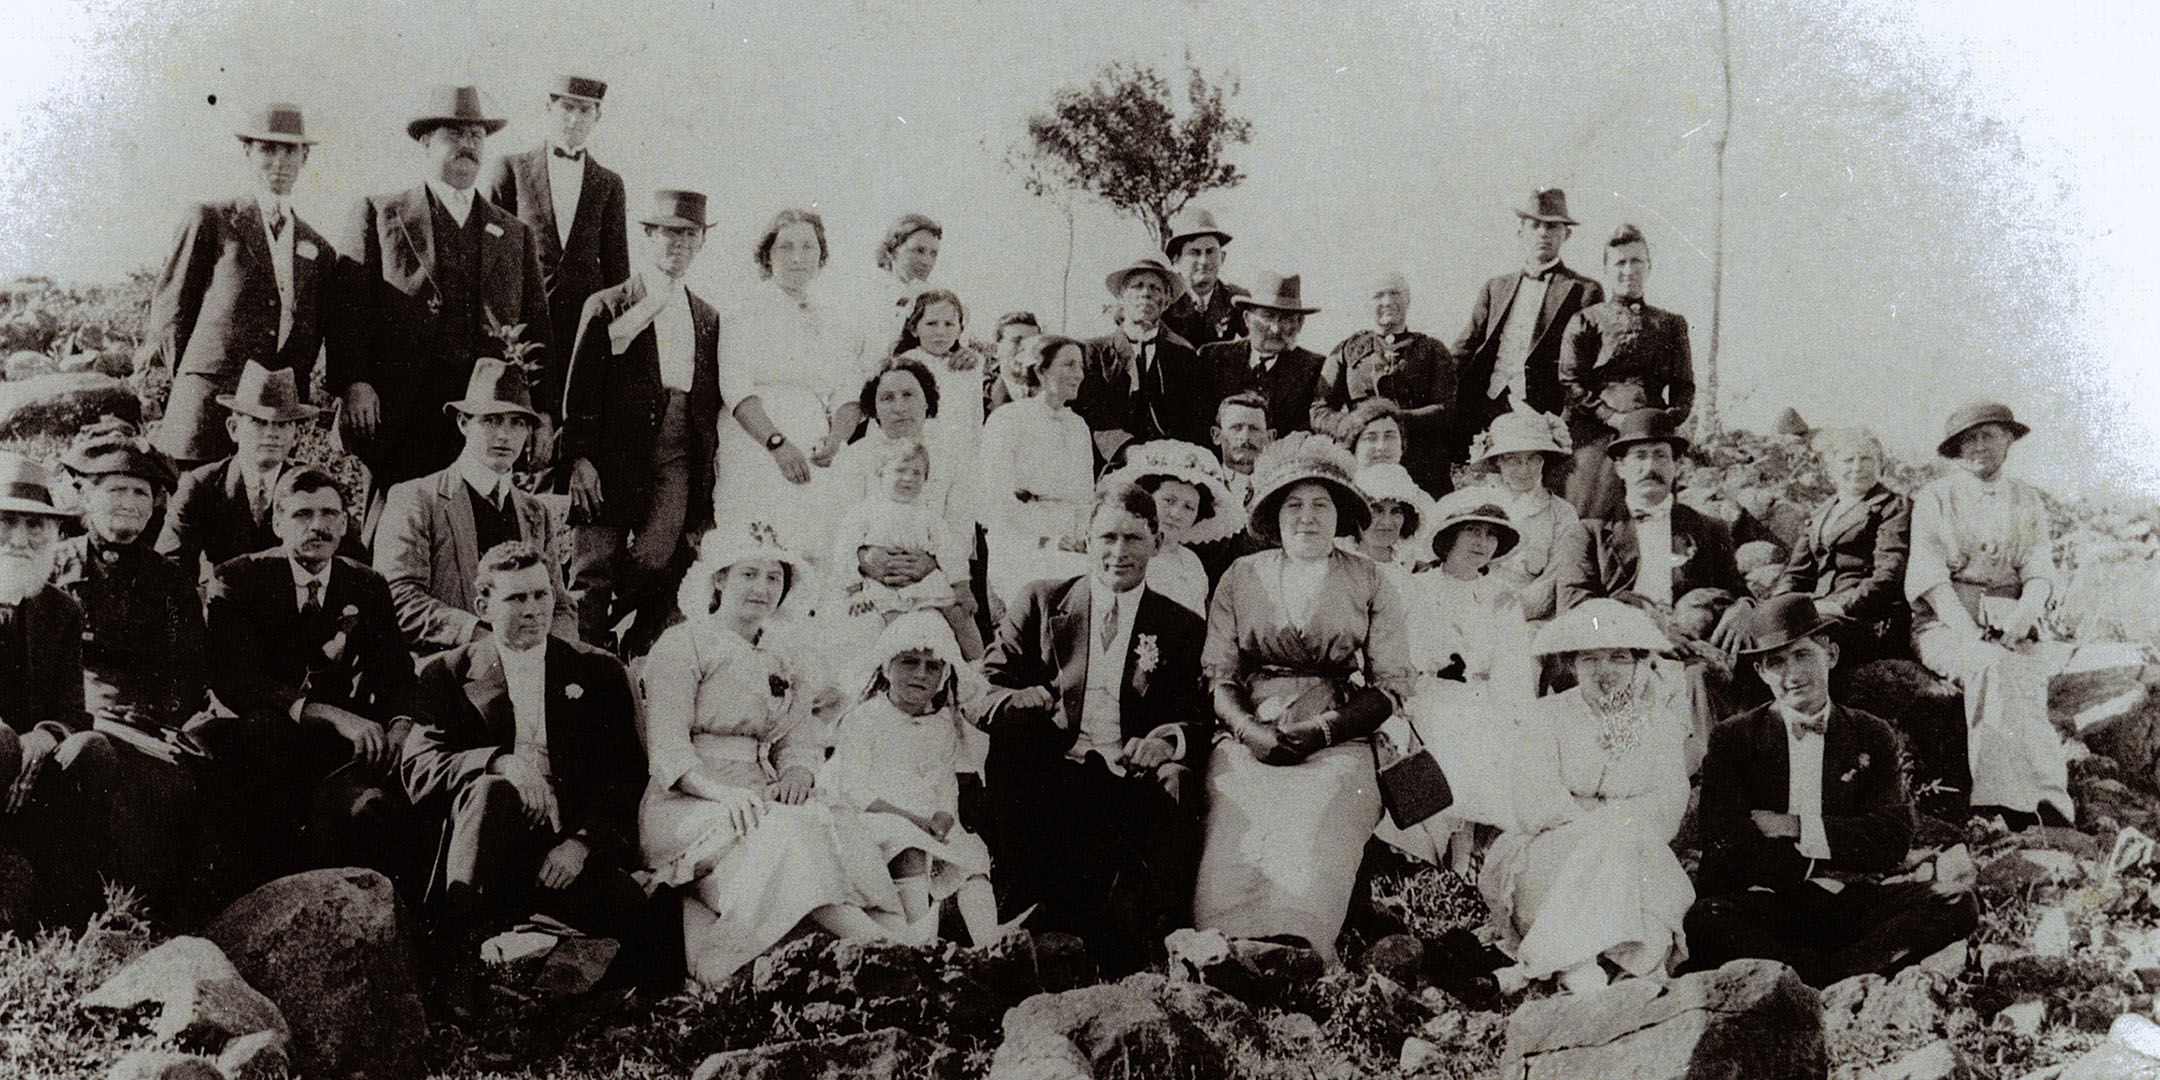 Going away party for the wedding of Maria and Lorenzo Roder’s daughter, Mary (front row, holding handbag), c 1921. Maria and Lorenzo are in the back row, third and fourth from right. Reproduced courtesy Pauline Lovitt.